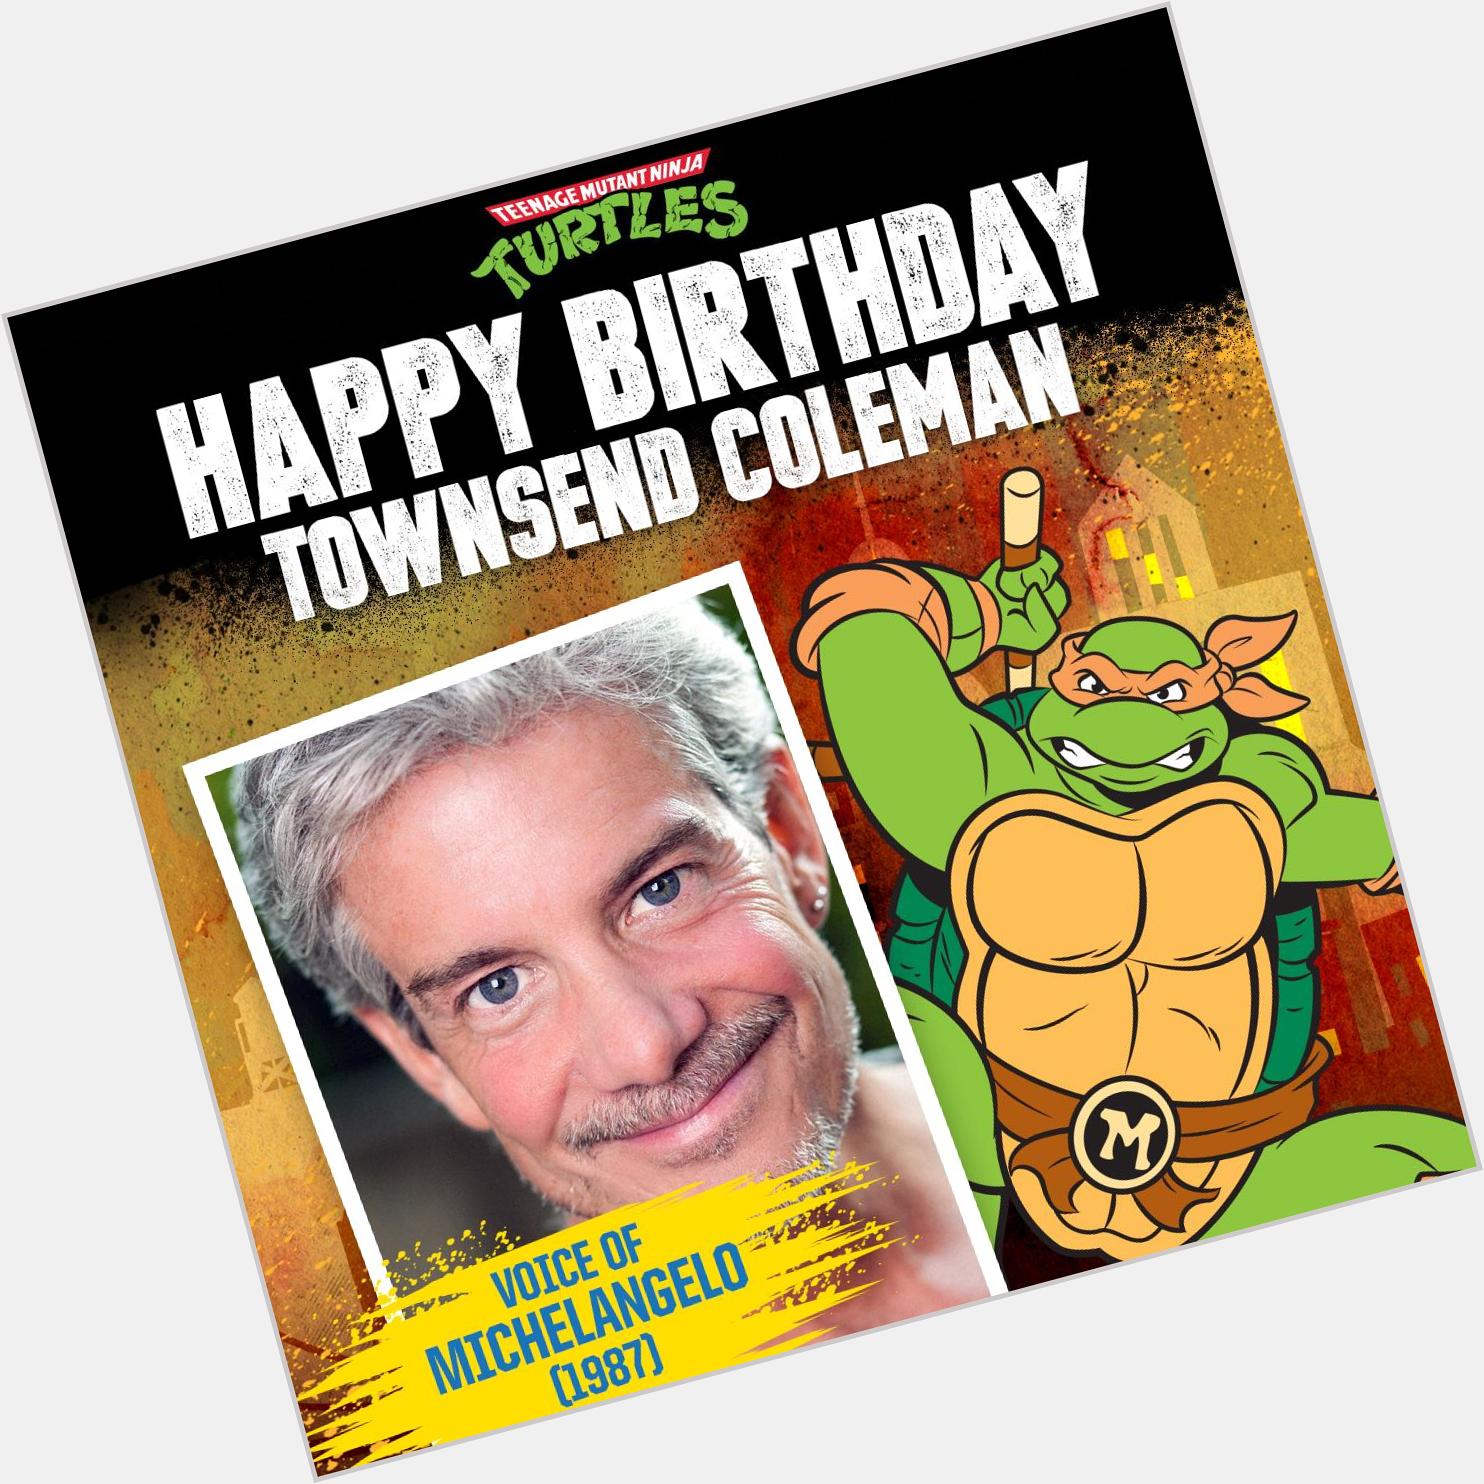 Give a big Happy Birthday to the original voice of Michelangelo, Townsend Coleman! 